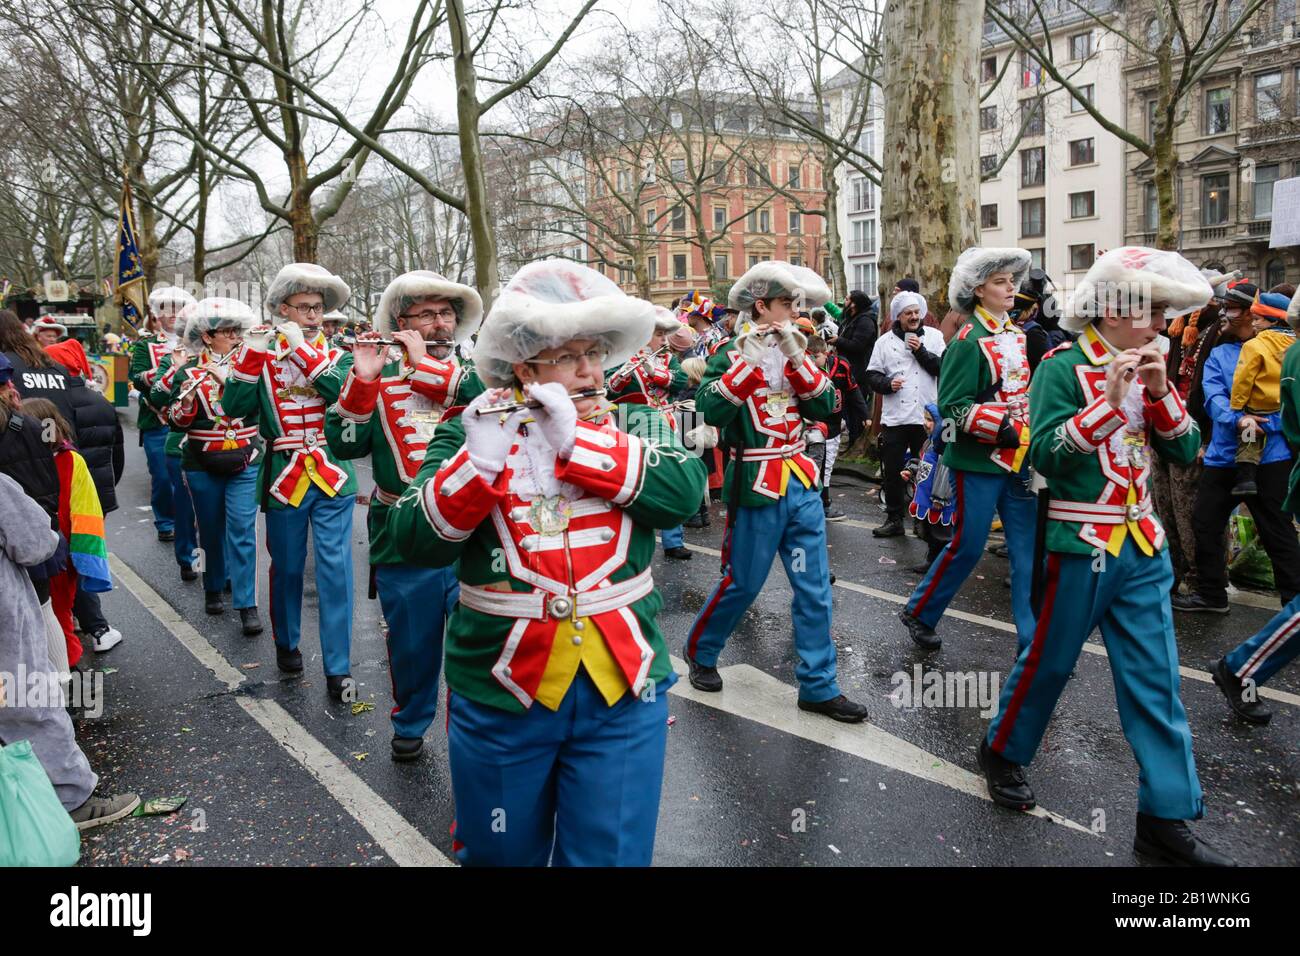 Mainz, Germany. 24th February 2020. Members of the marching band of the carnival guards Mainzer Freischuetzengarde march in the Mainz Rose Monday parade. Around half a million people lined the streets of Mainz for the traditional Rose Monday Carnival Parade. The 9 km long parade with over 9,000 participants is one of the three large Rose Monday Parades in Germany. Stock Photo